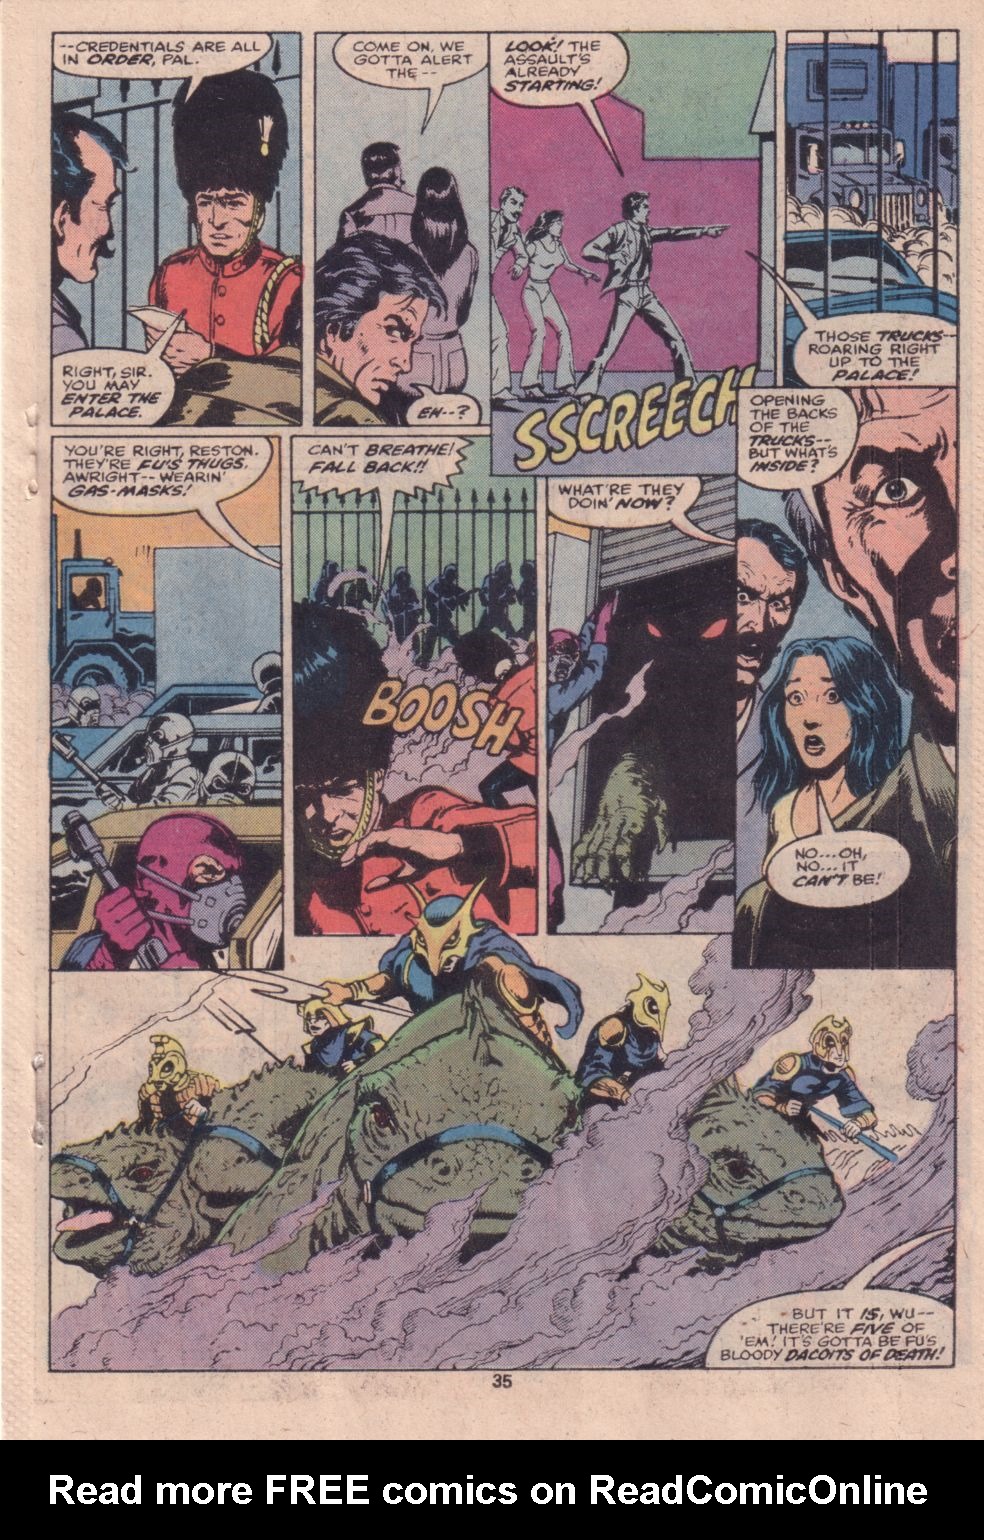 What If? (1977) issue 16 - Shang Chi Master of Kung Fu fought on The side of Fu Manchu - Page 27